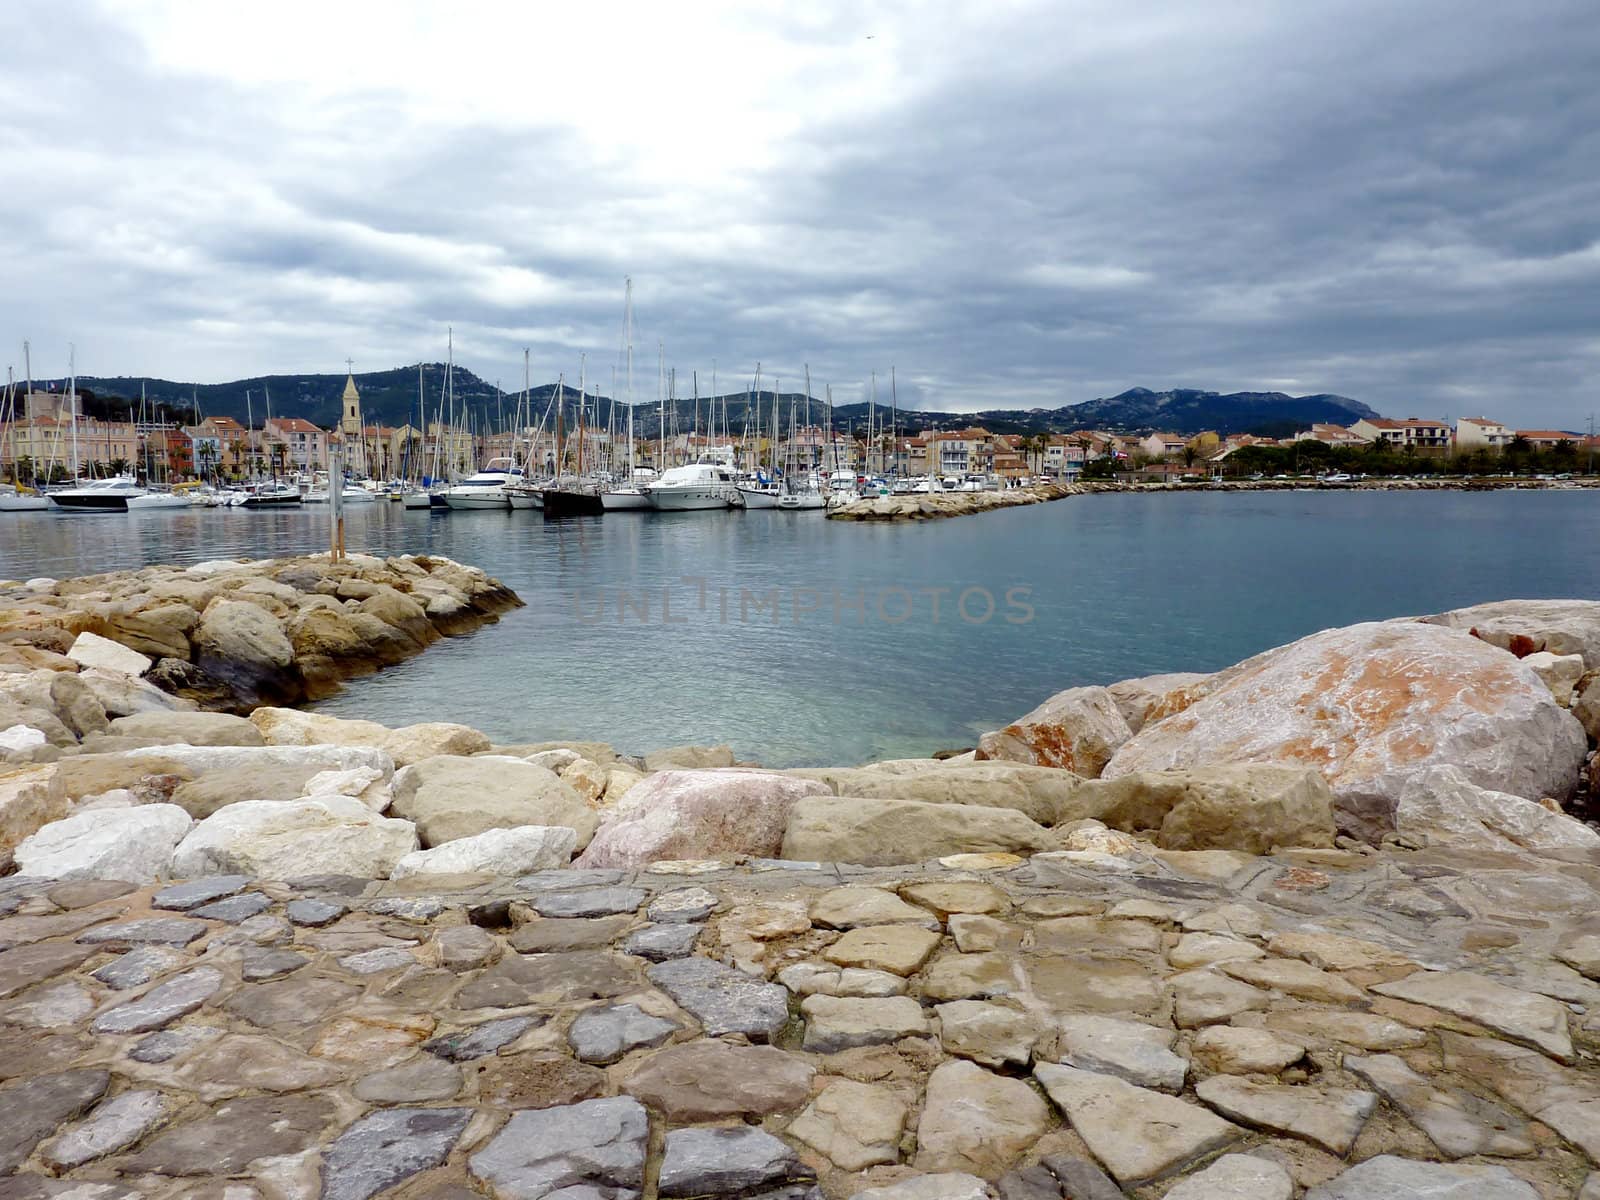 View of Sanary-sur-mer harbor with its famous church and the boats, from a place made of stones in the foreground by cloudy weather, France